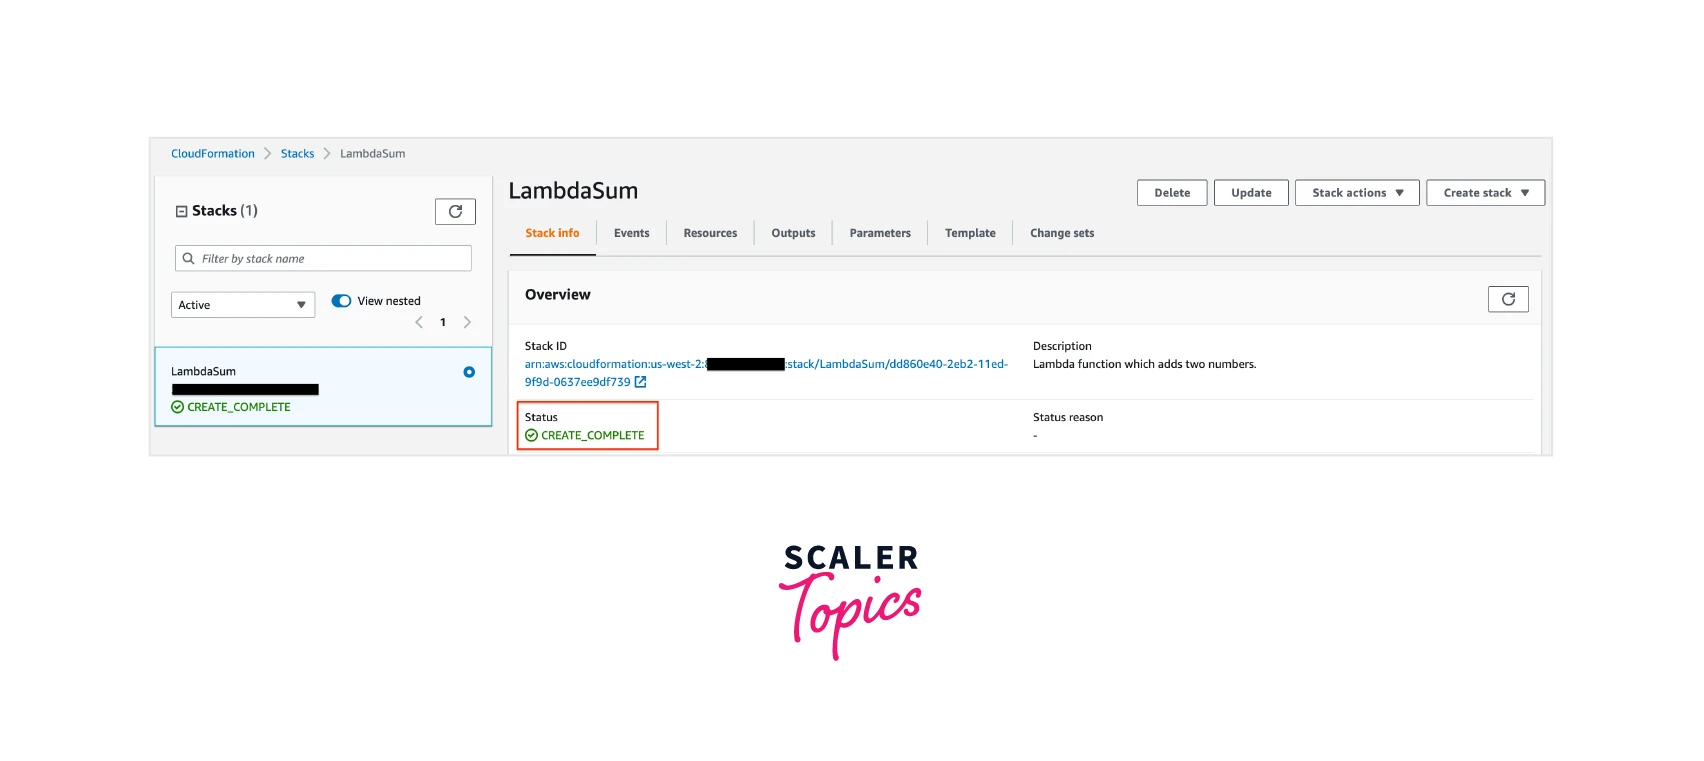 selecting-lambdasum-stack-on-cloudformation-page